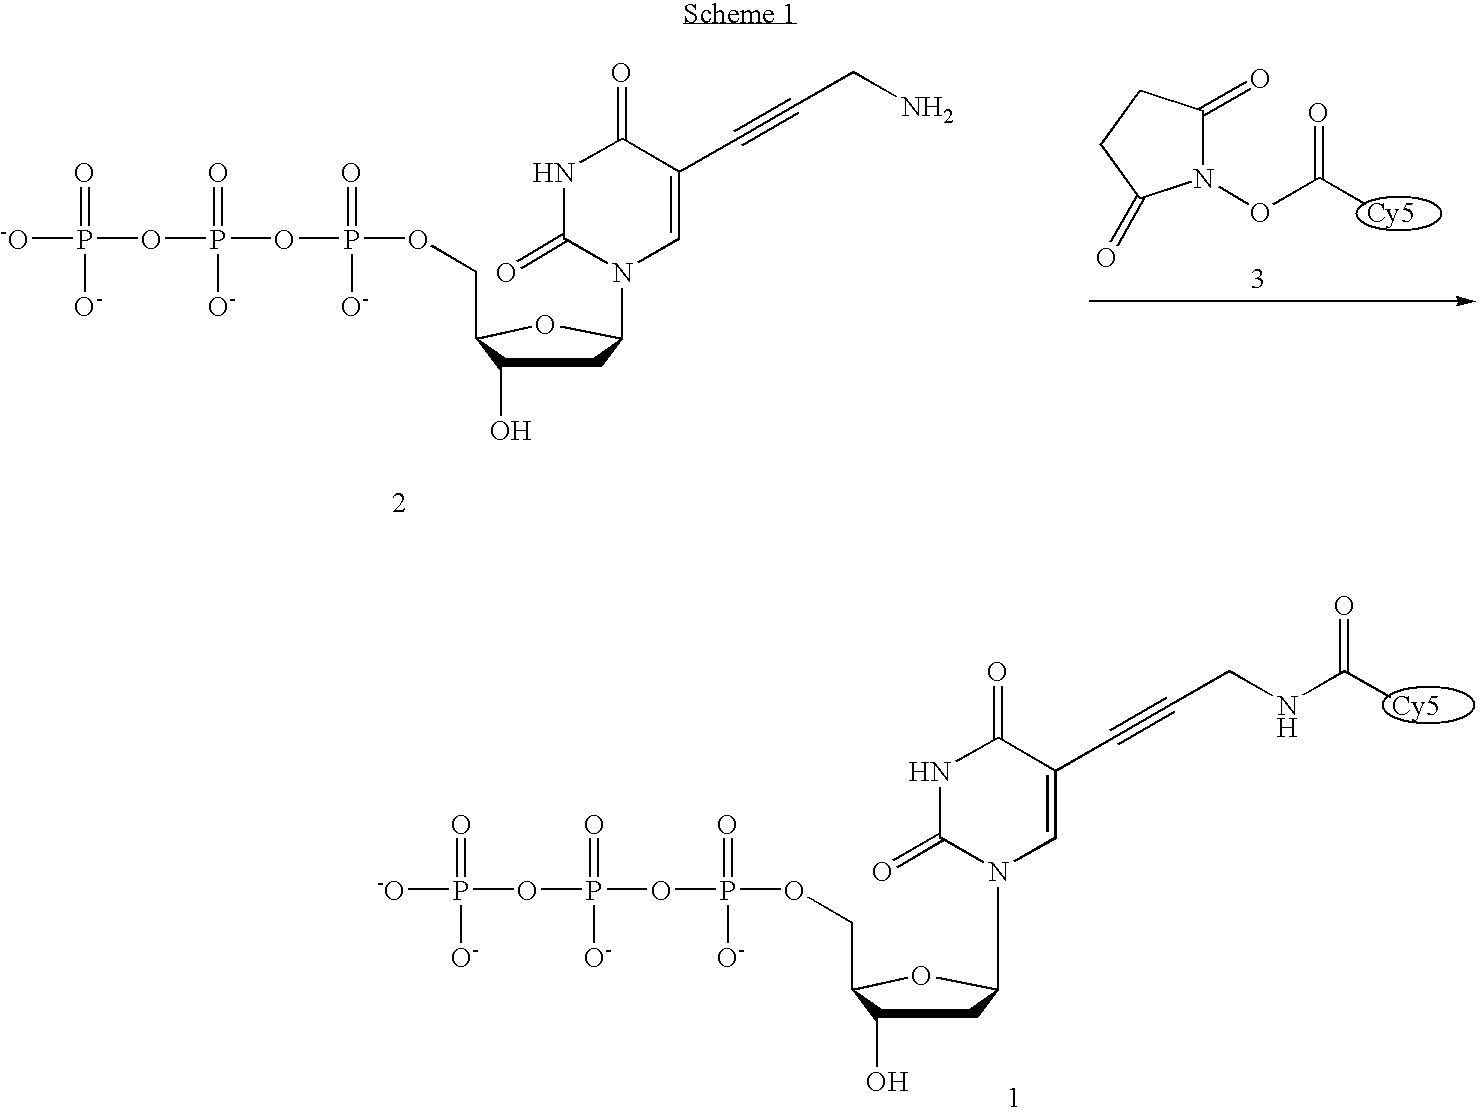 Fluorescently labeled nucleoside triphosphates and analogs thereof for sequencing nucleic acids